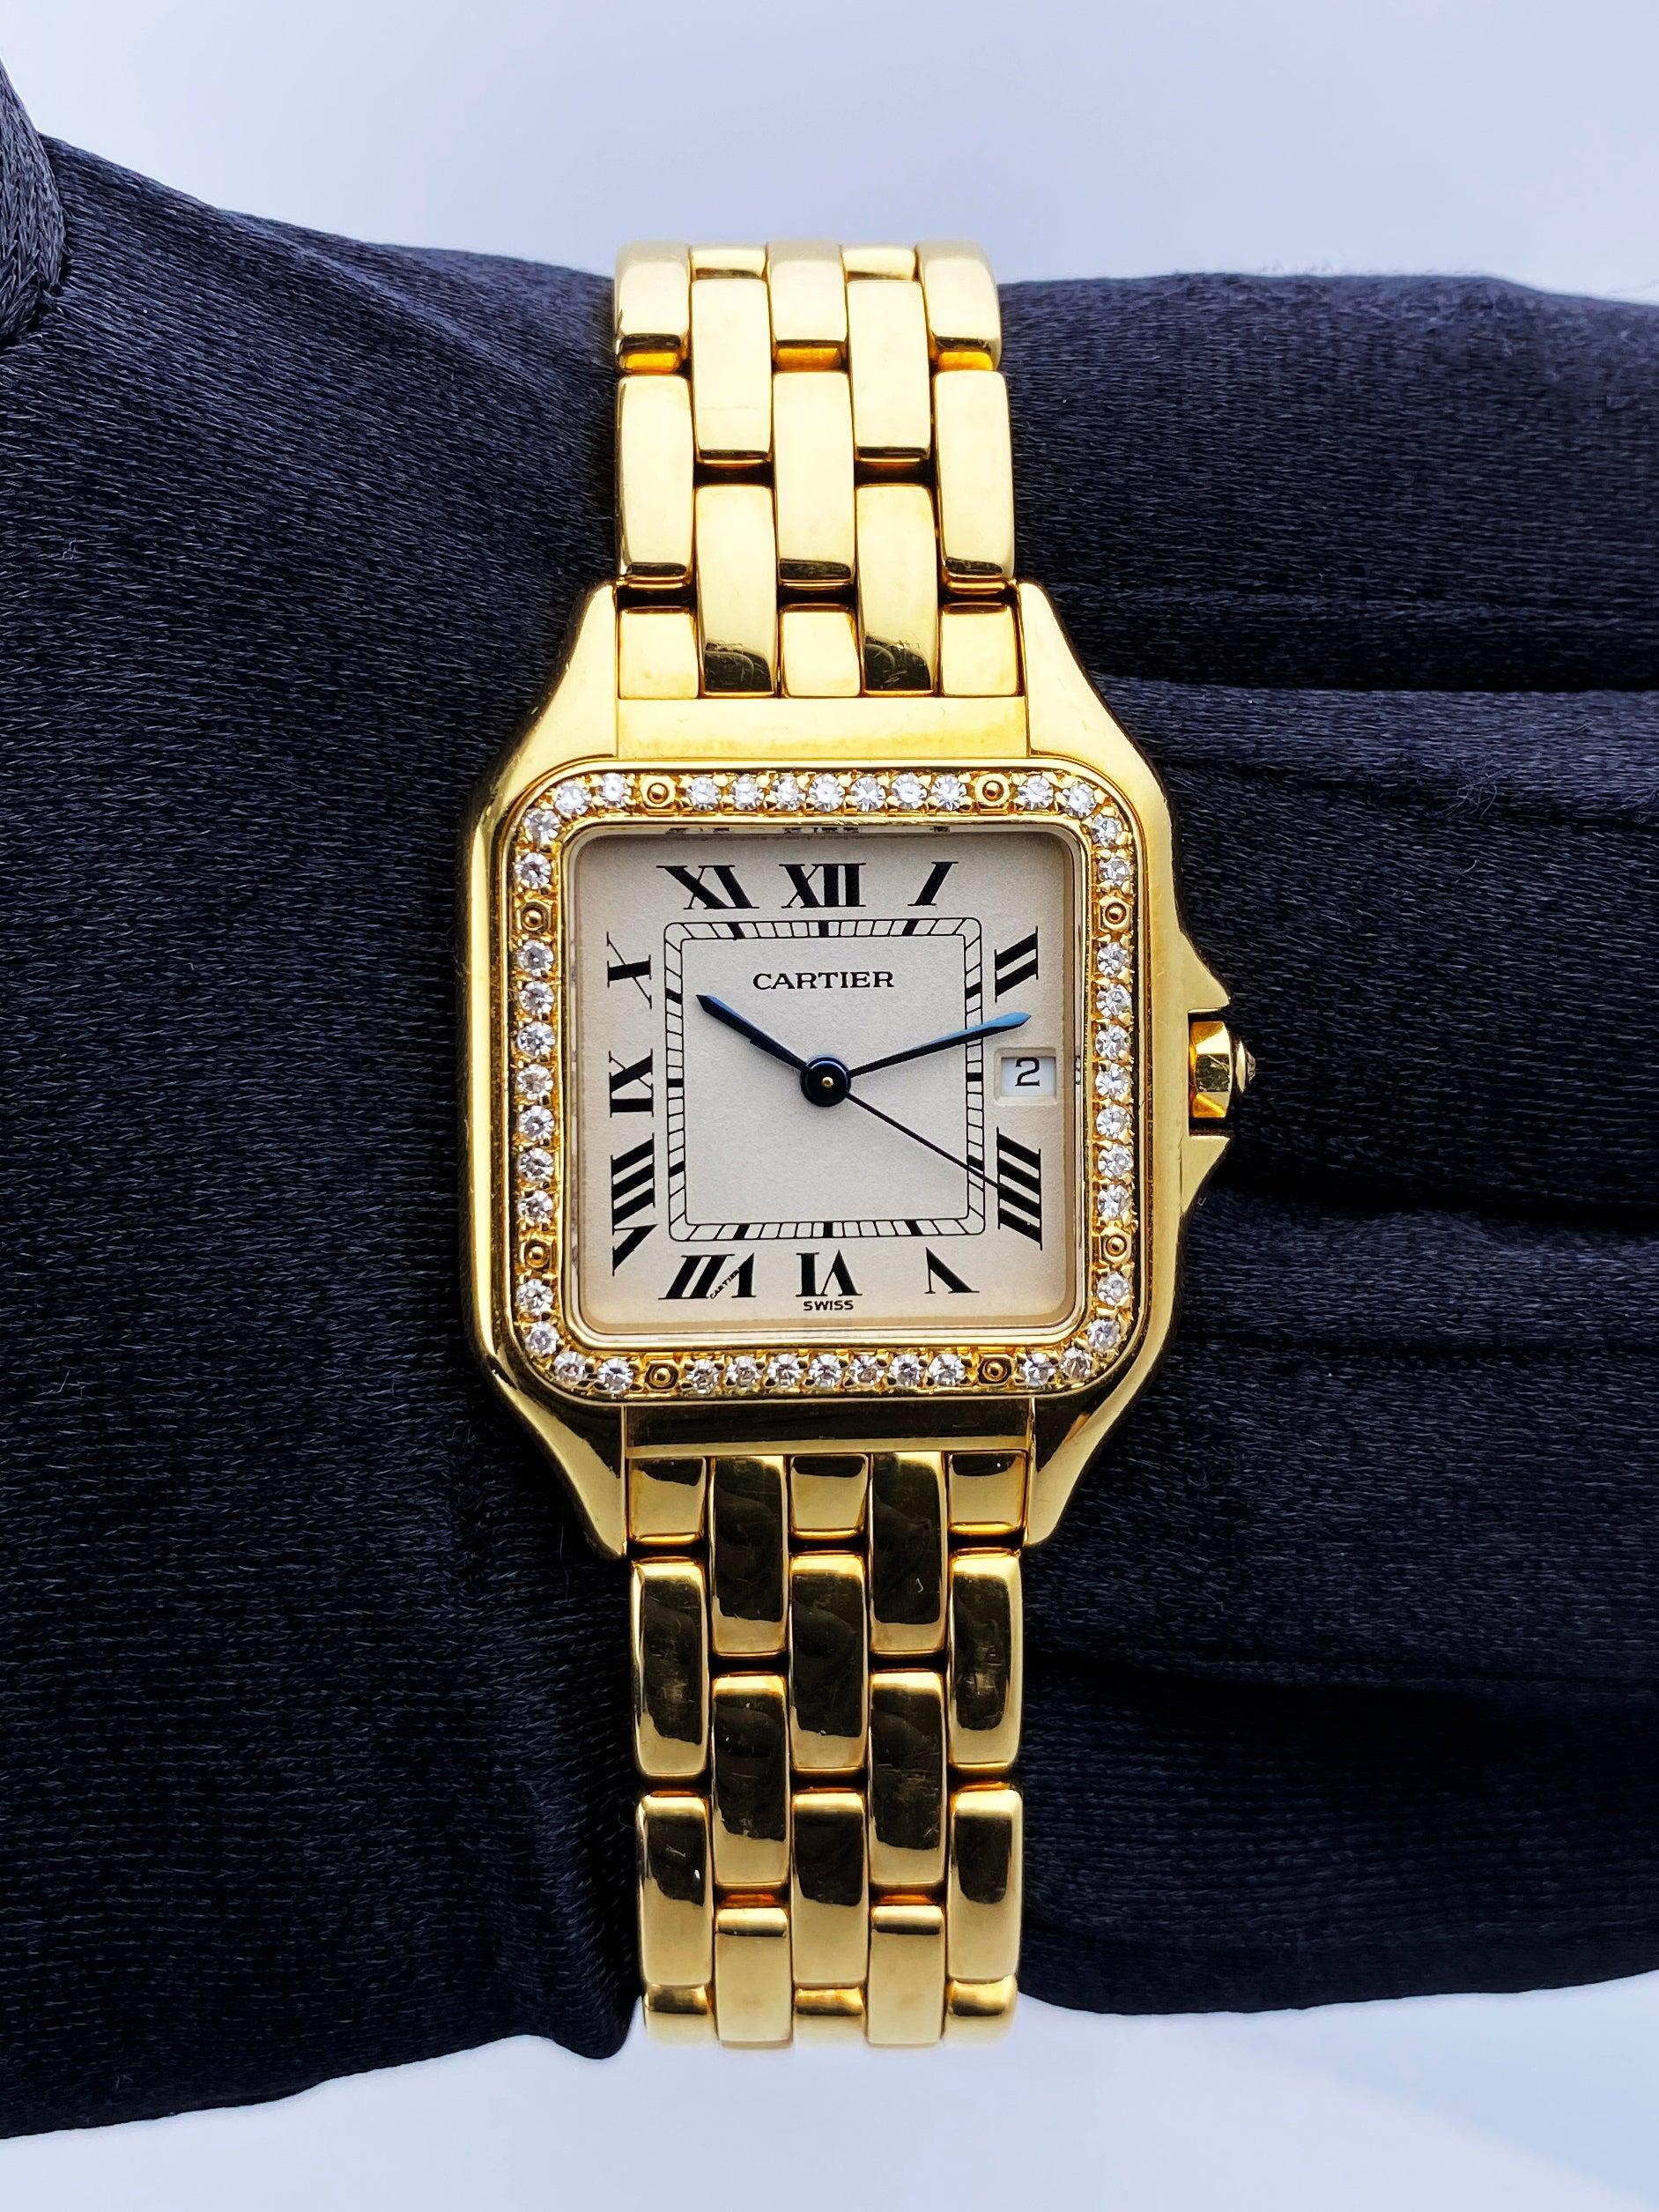 Cartier Panthere Large Size Watch. 29mm 18K yellow gold case. 18K yellow gold bezel with original factory diamond set. Off-White dial with blue steel hands and black Roman numeral hour markers. Minute markers on the inner dial. Date display at the 3